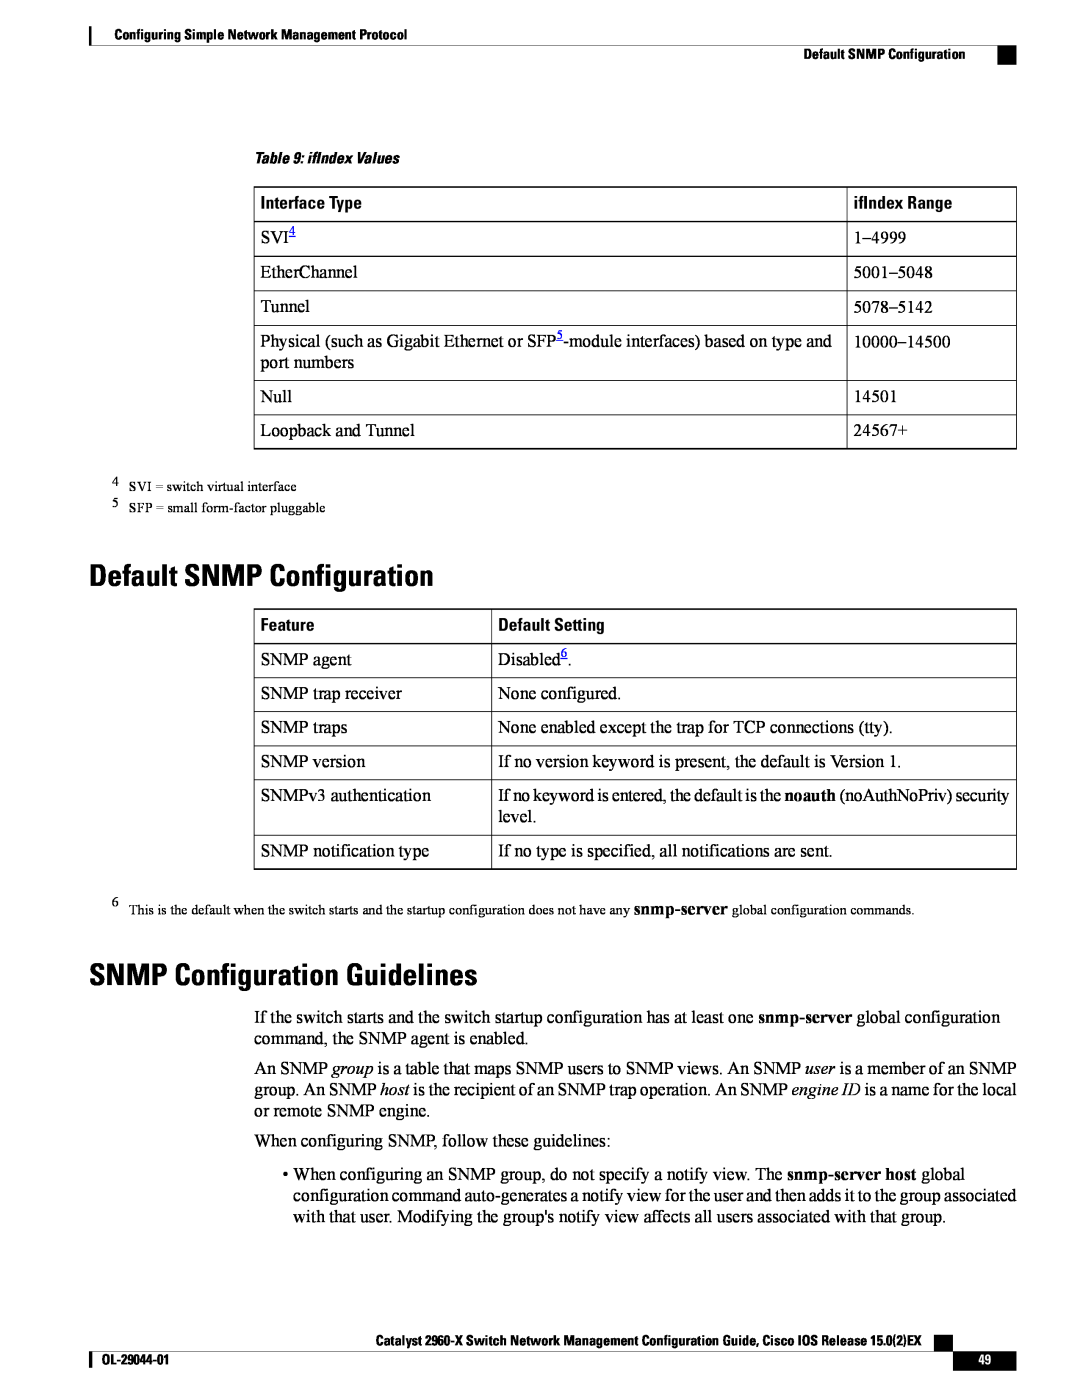 Cisco Systems C2960XSTACK manual Default SNMP Configuration, SNMP Configuration Guidelines, Interface Type, Default Setting 